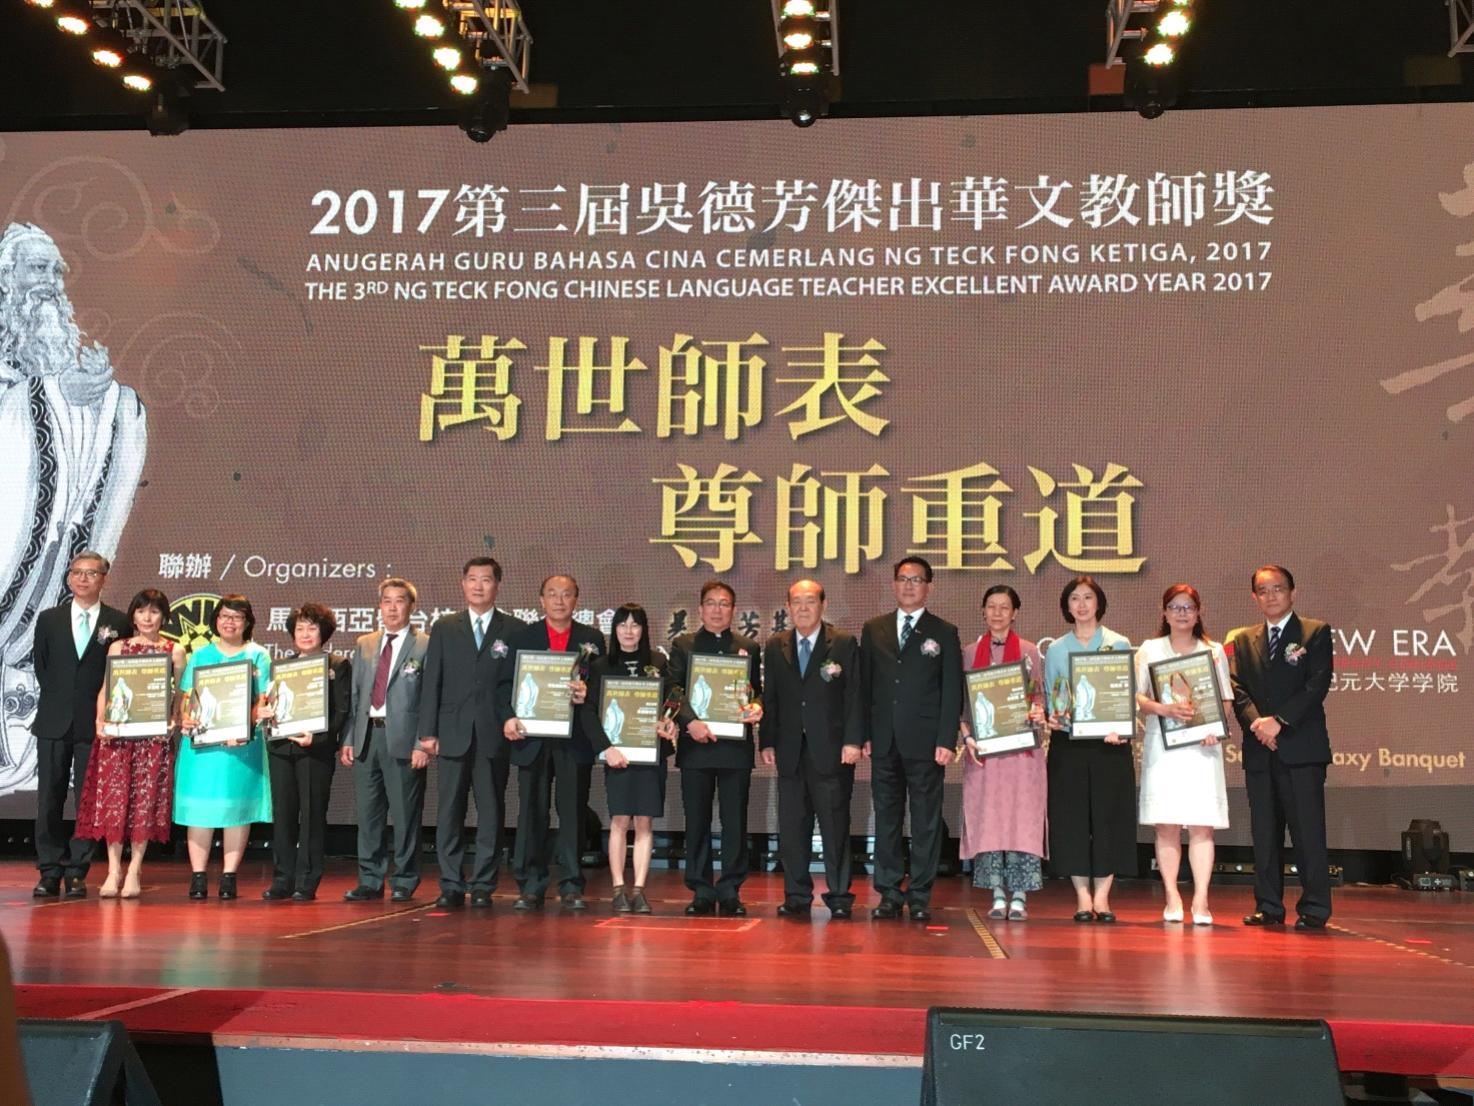 Deputy Representative Michael S.Y. Yiin ( standing row sixth left)  The 3rd Ng Teck Fong Excellent Chinese Language Teacher Award Year 2017 with winning teacher take photograph together.